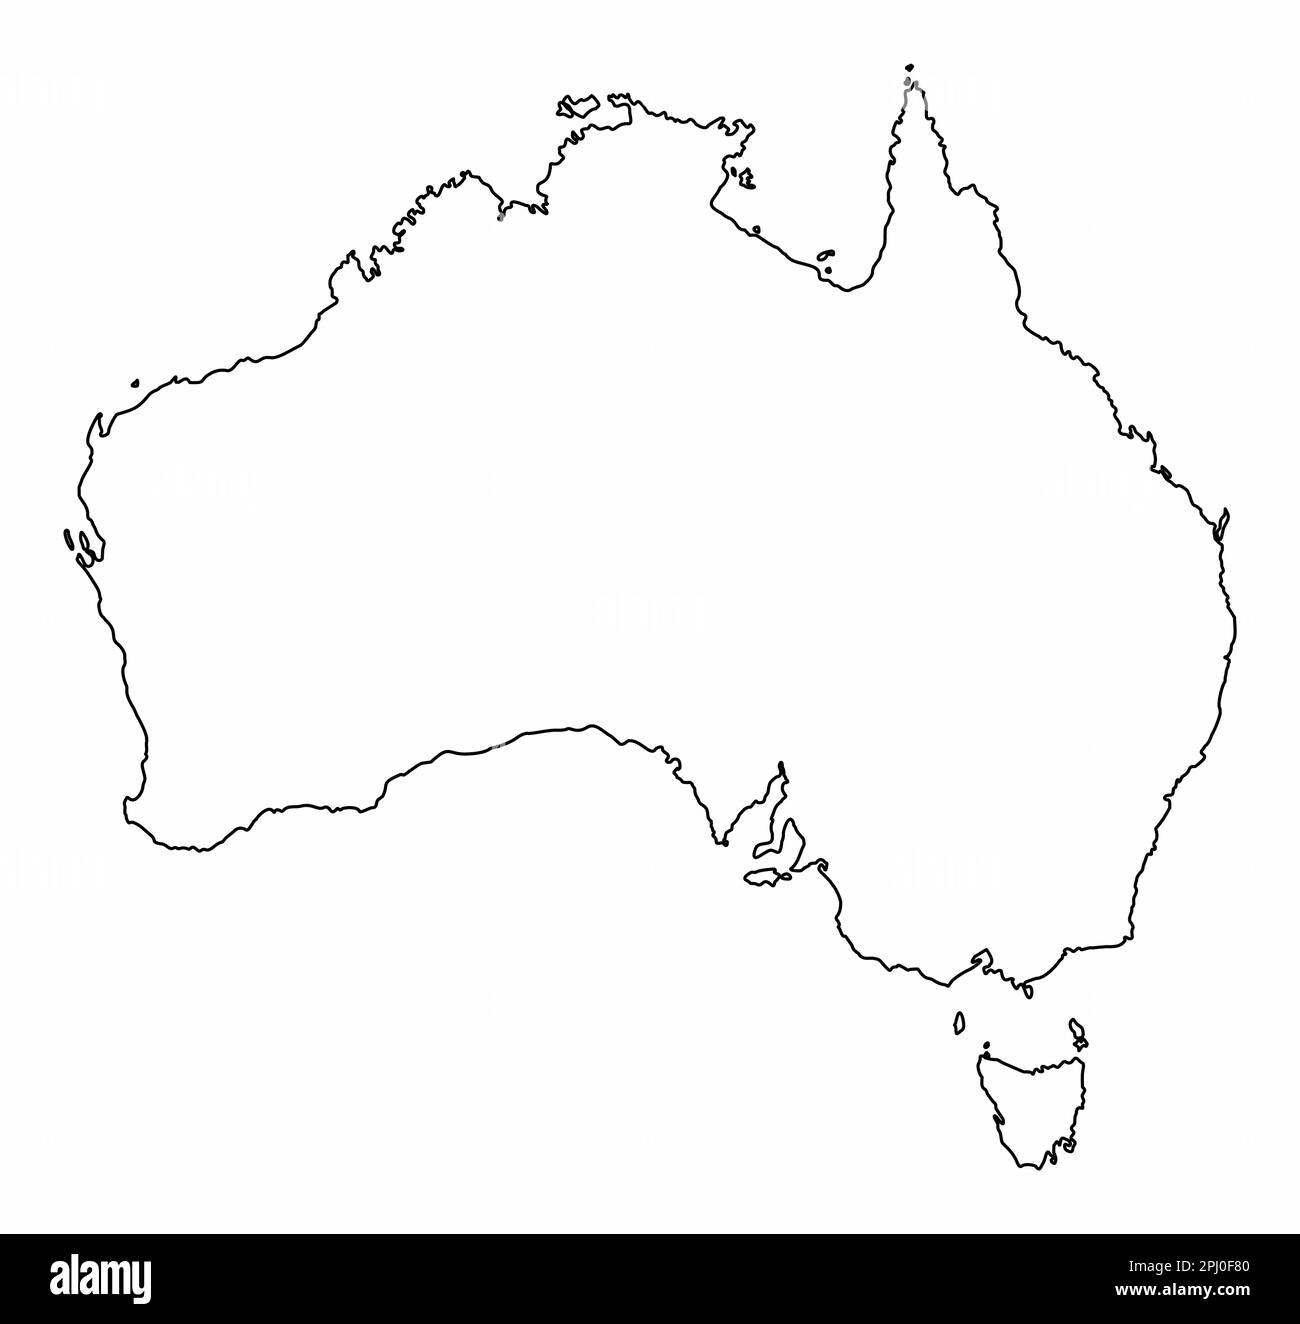 Australia outline map isolated on white background Stock Vector